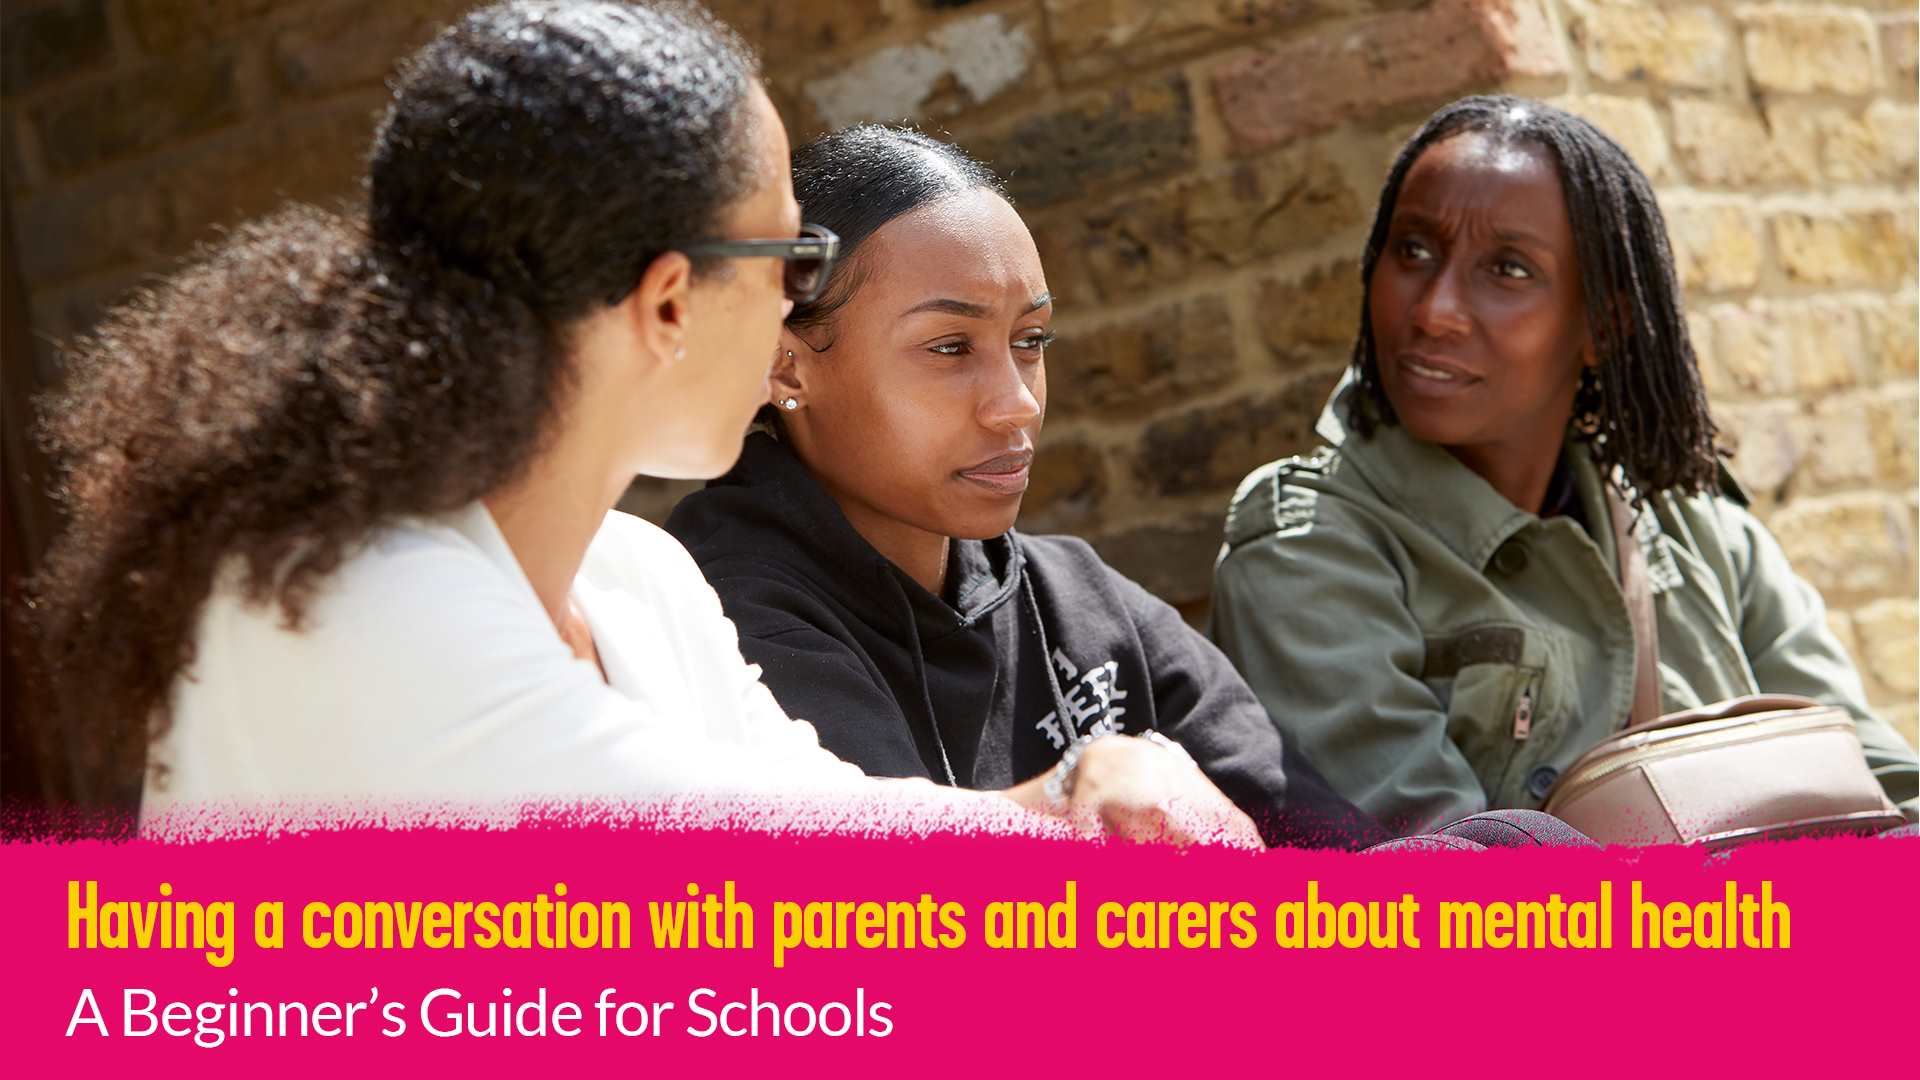 A photo of two parents and their child having a conversation. Underneath the image is text that says 'Having a conversation with parents and carers about mental health. A beginner's Guide for Schools'.